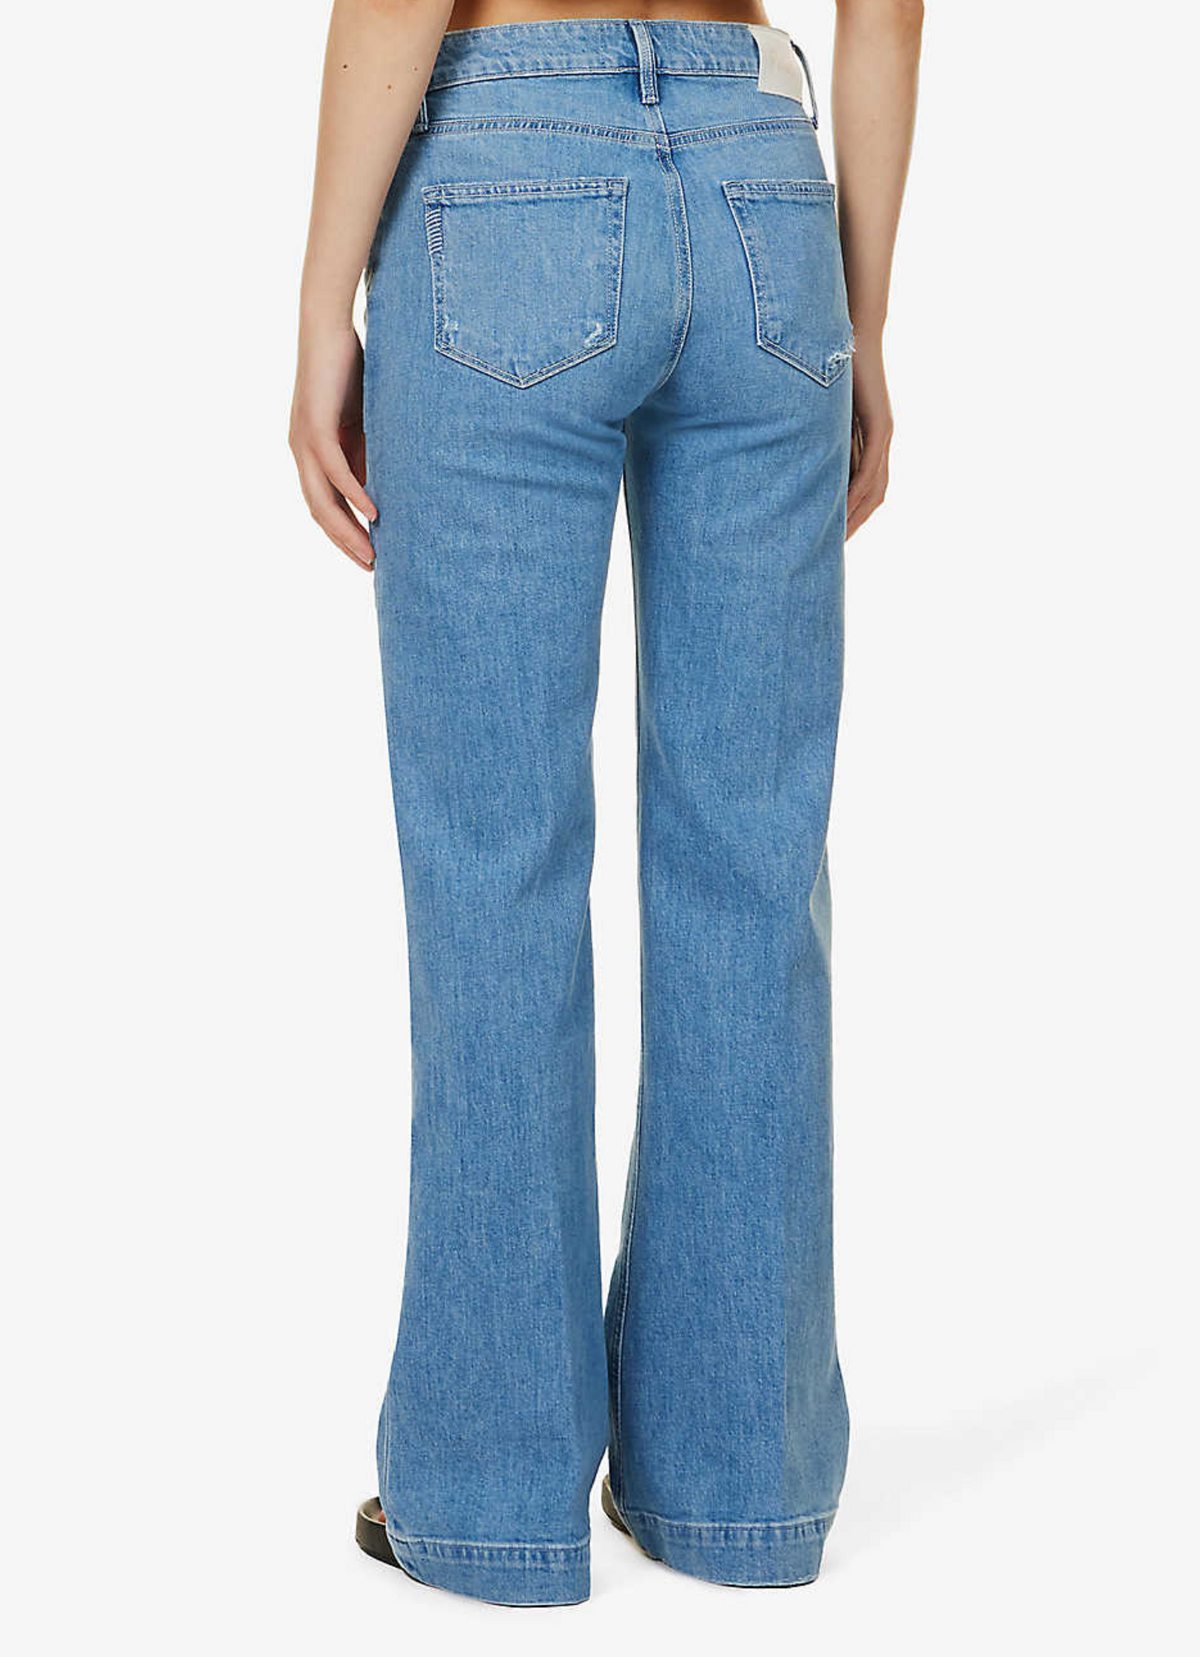 Wide leg light wash jeans with button fly